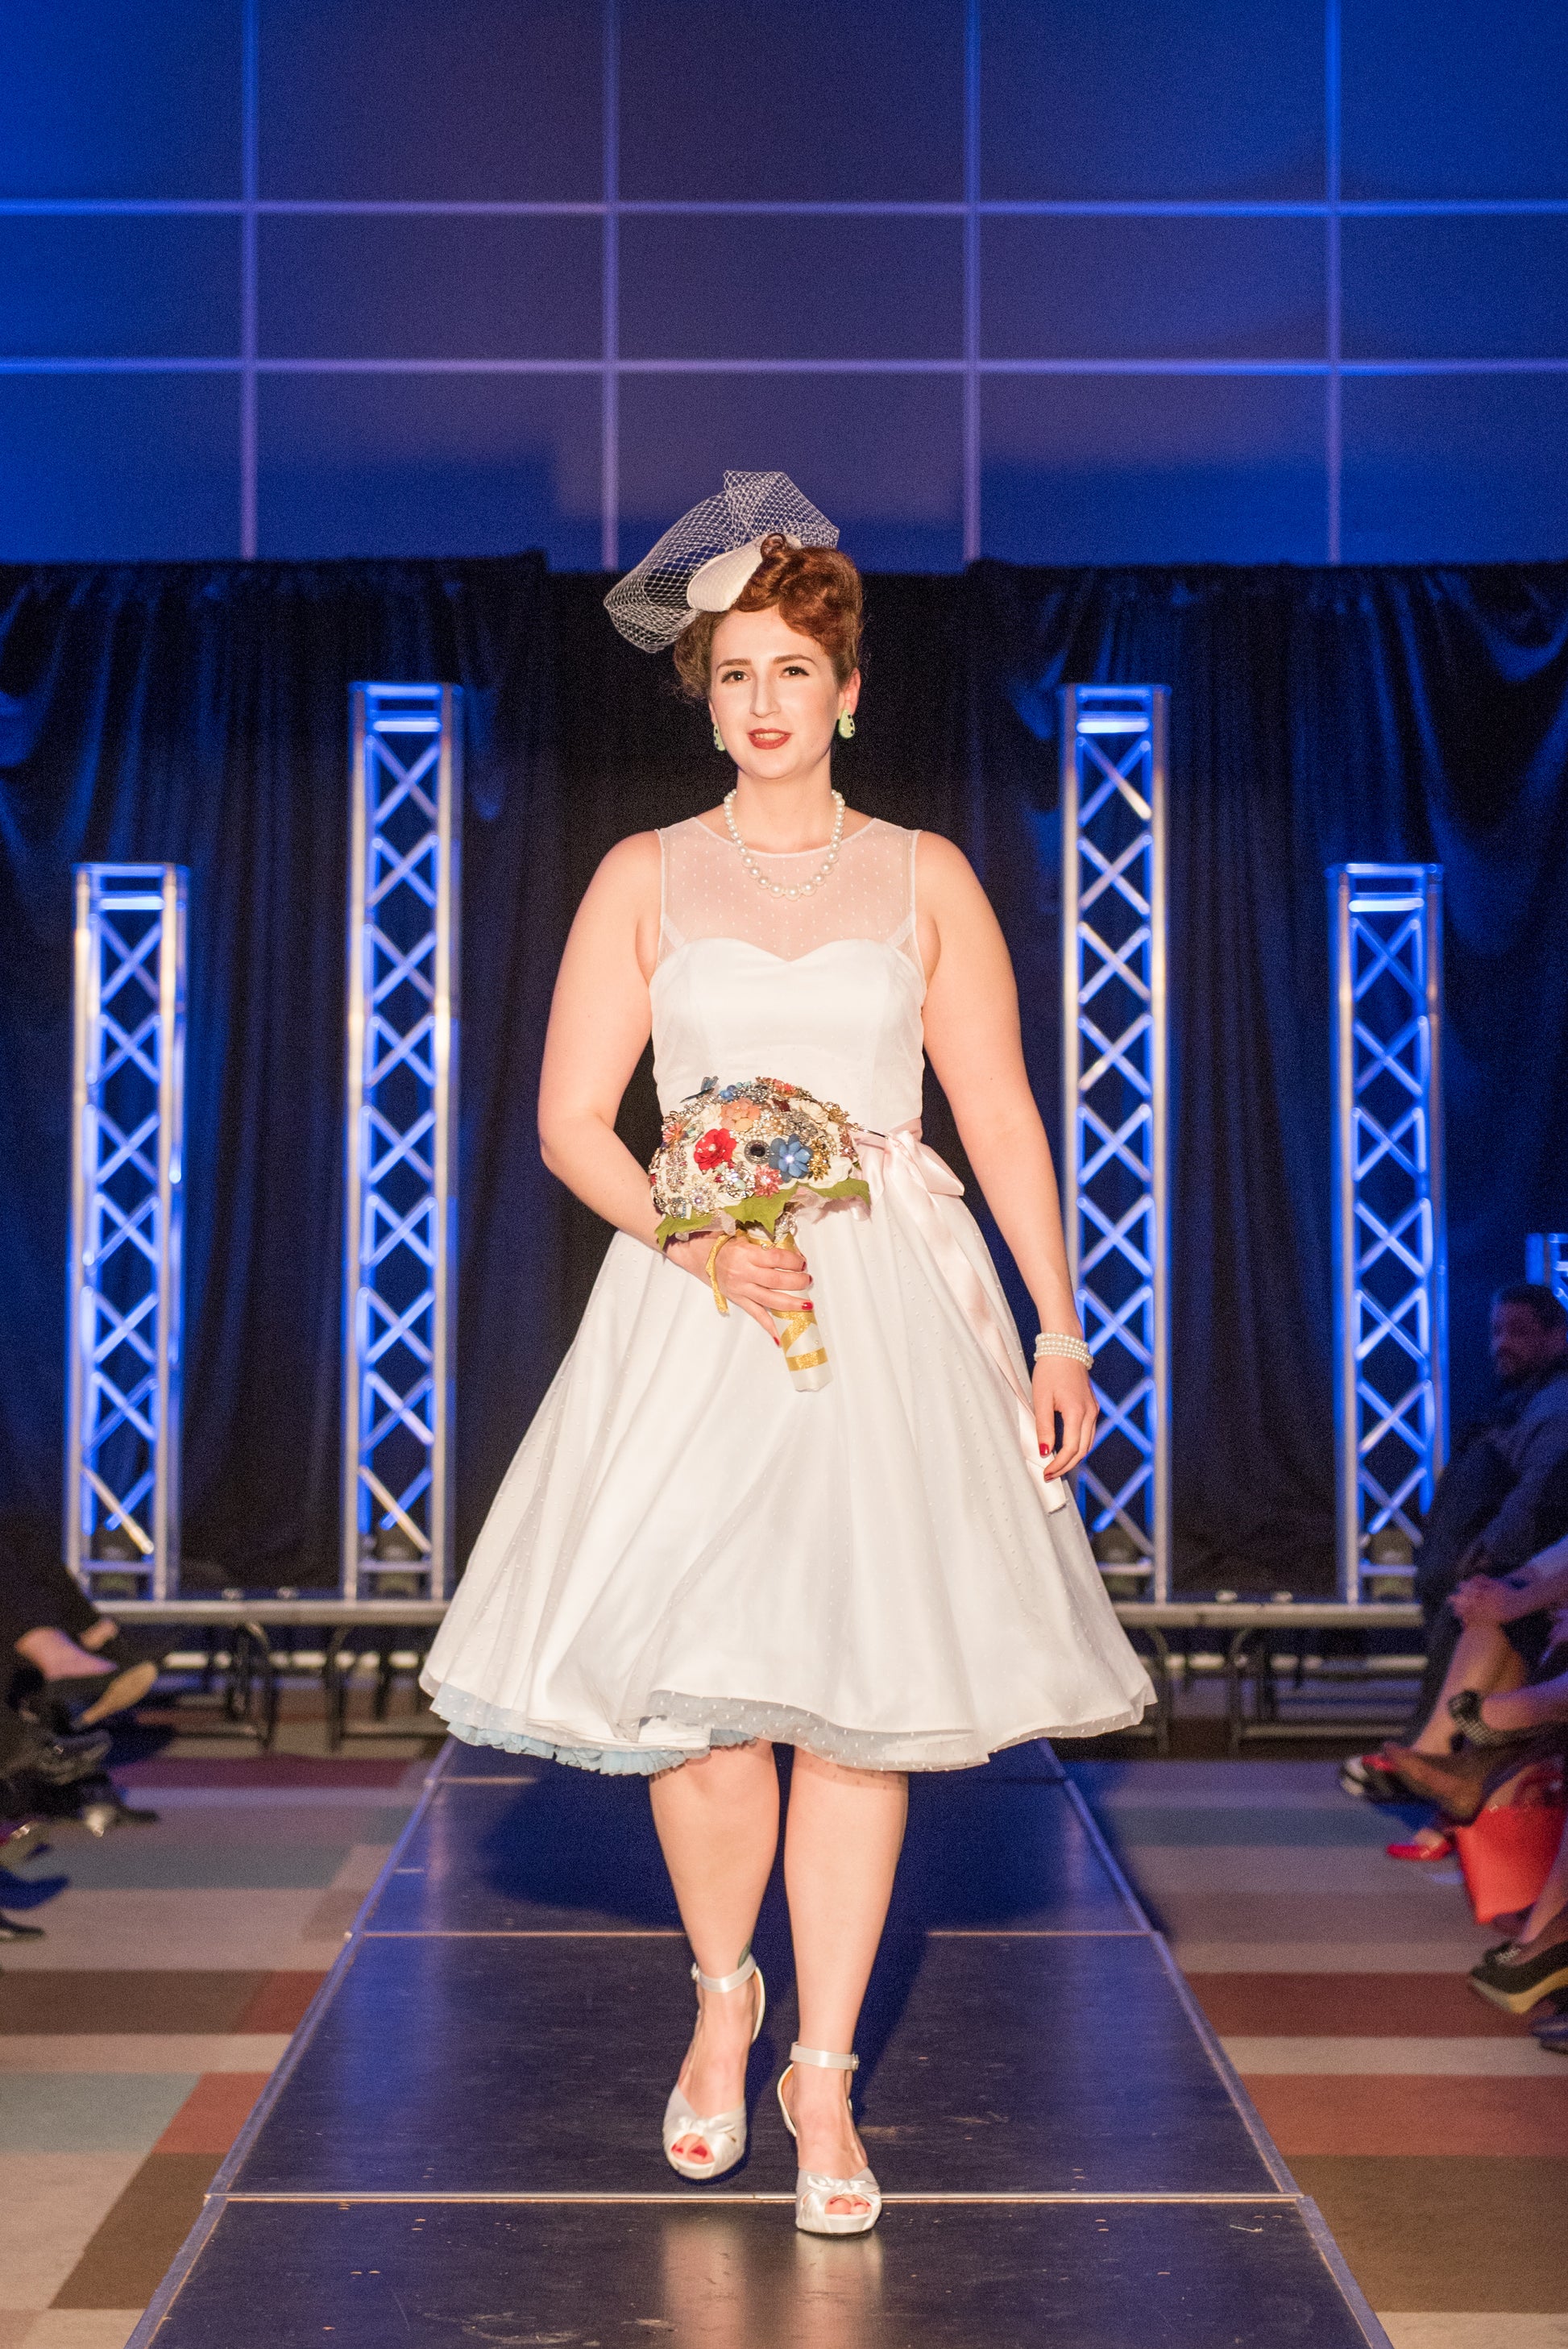 Retro Pinup Wedding Dress by Hollyville